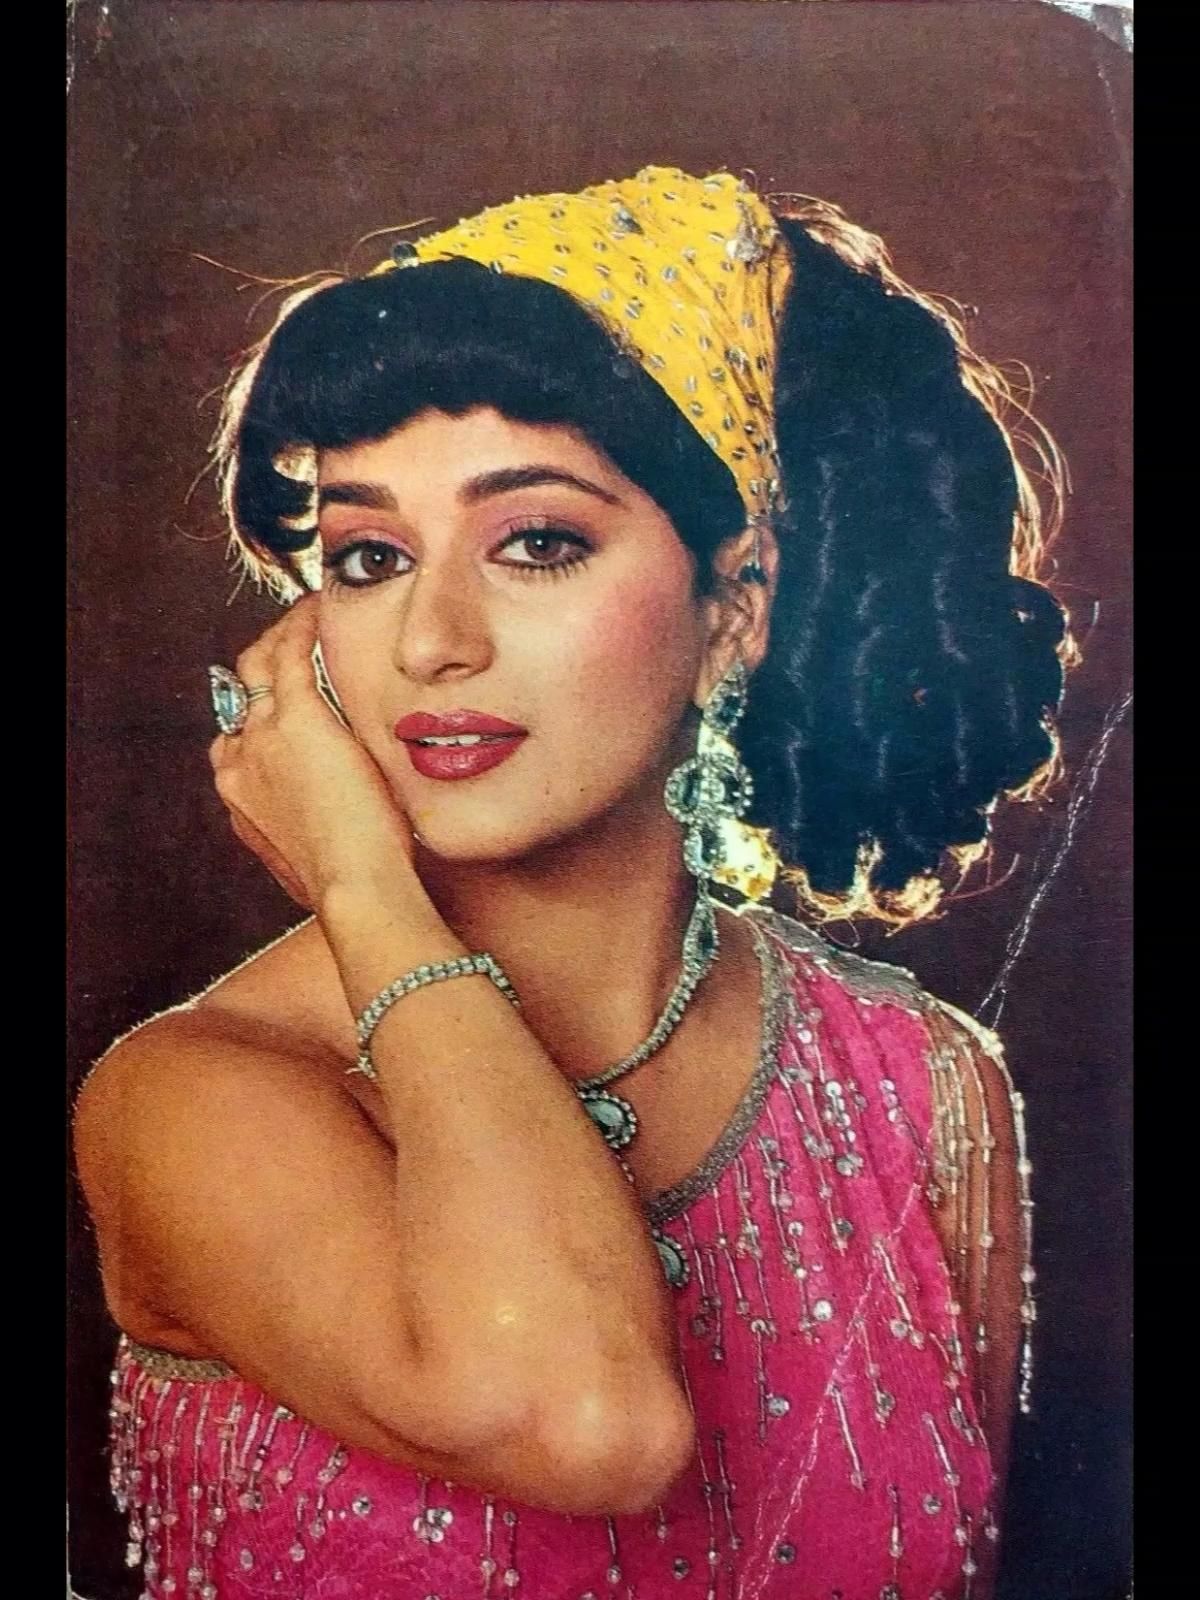 Madhuri Dixit Completes 36 Years In Bollywood 10 August 2020